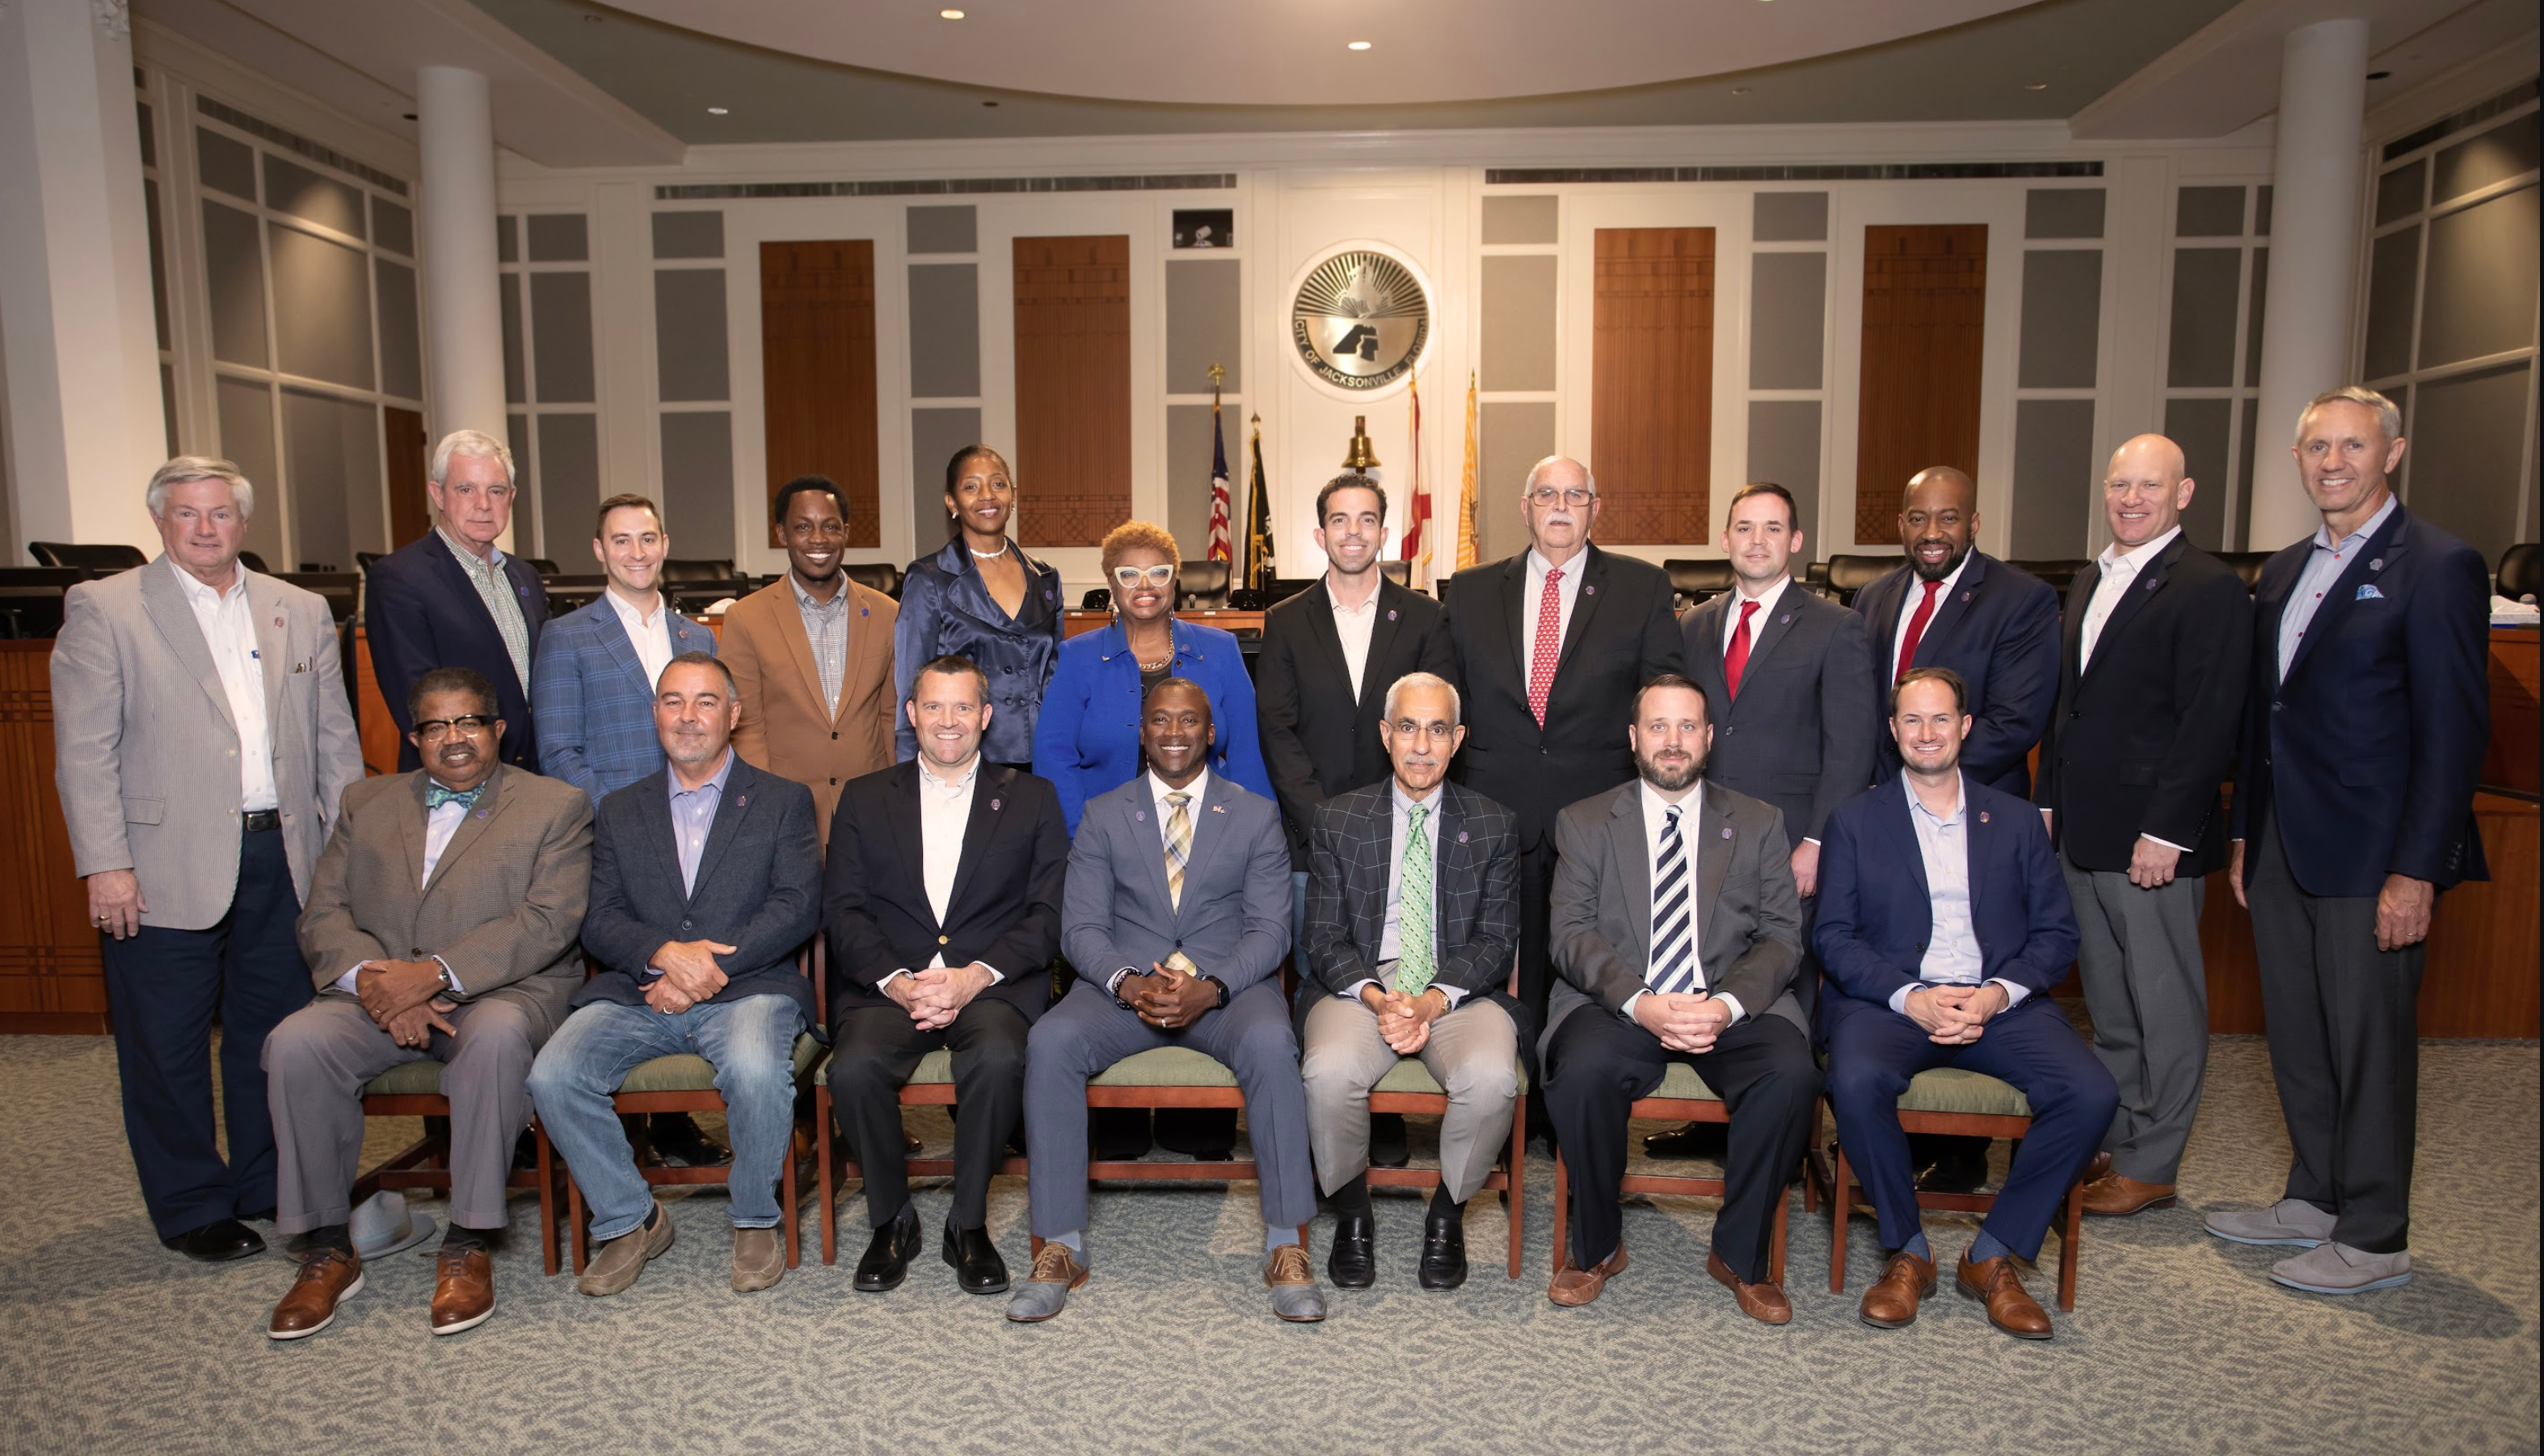 Featured image for “Meet Jacksonville’s new City Council”